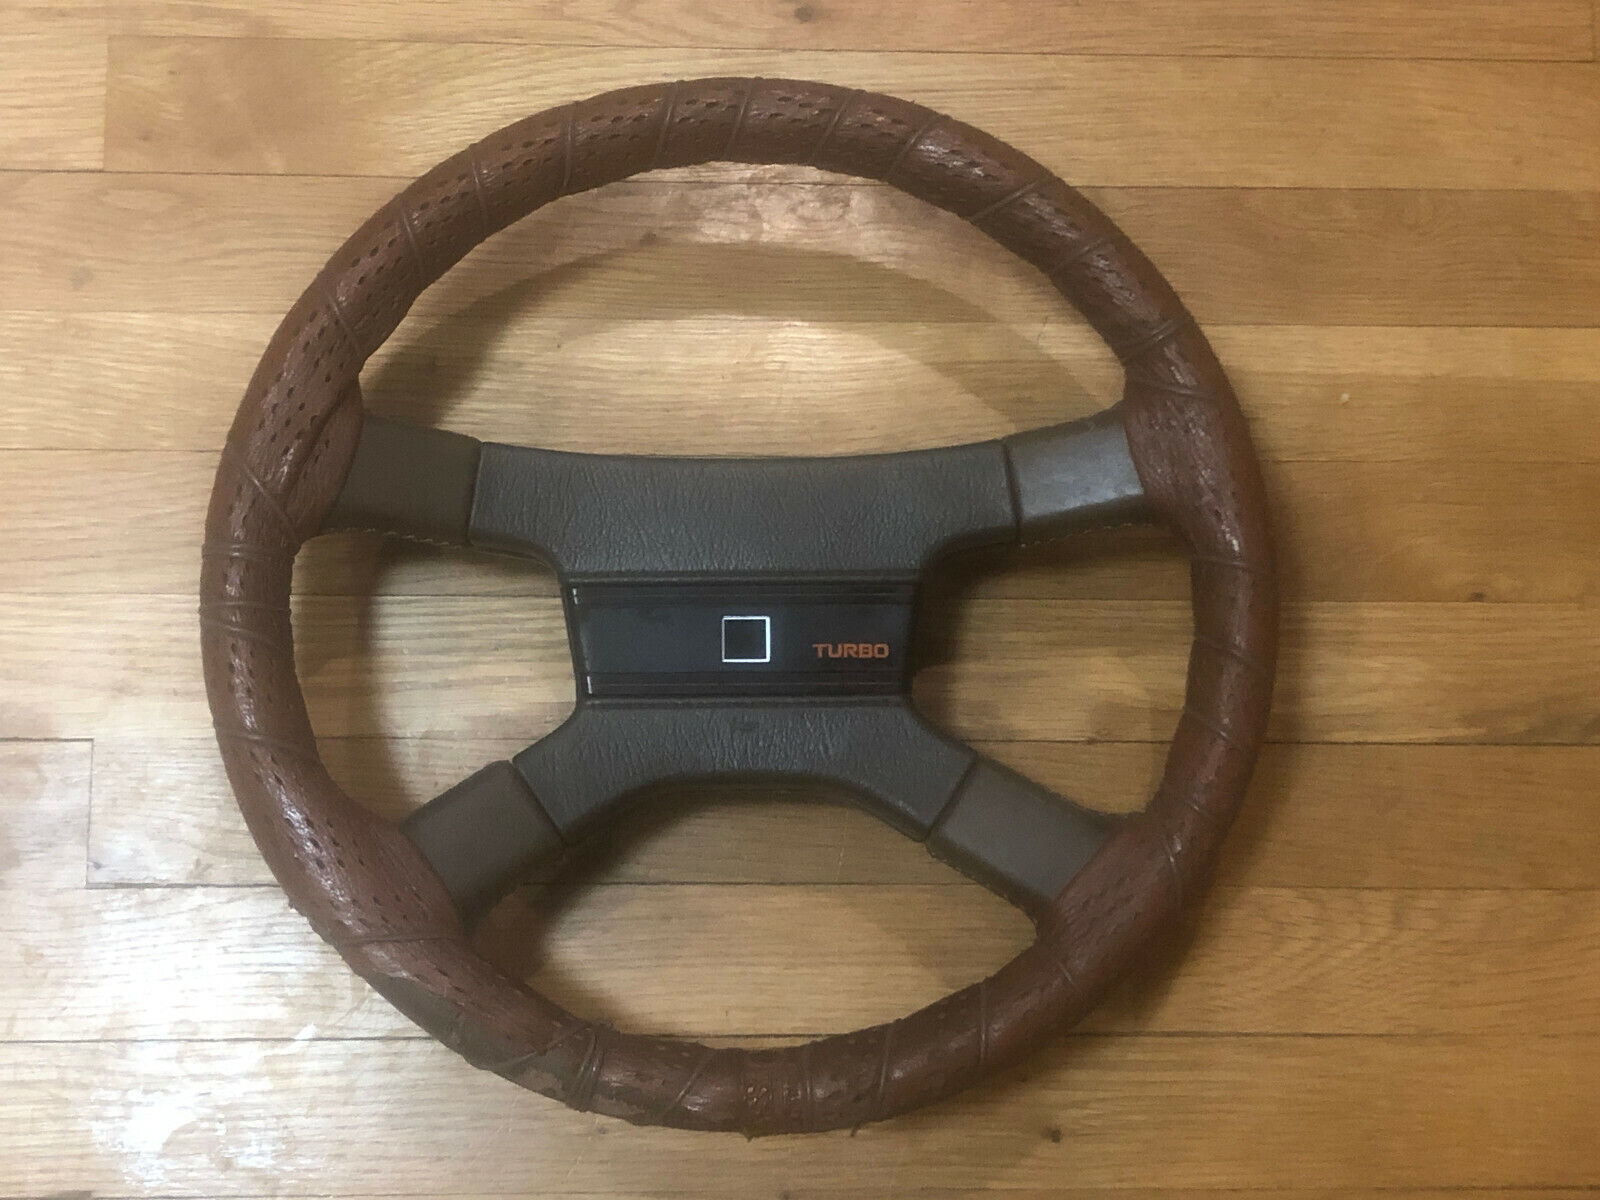 Starion / Conquest TSi steering wheel EARLY YEARS 83/84